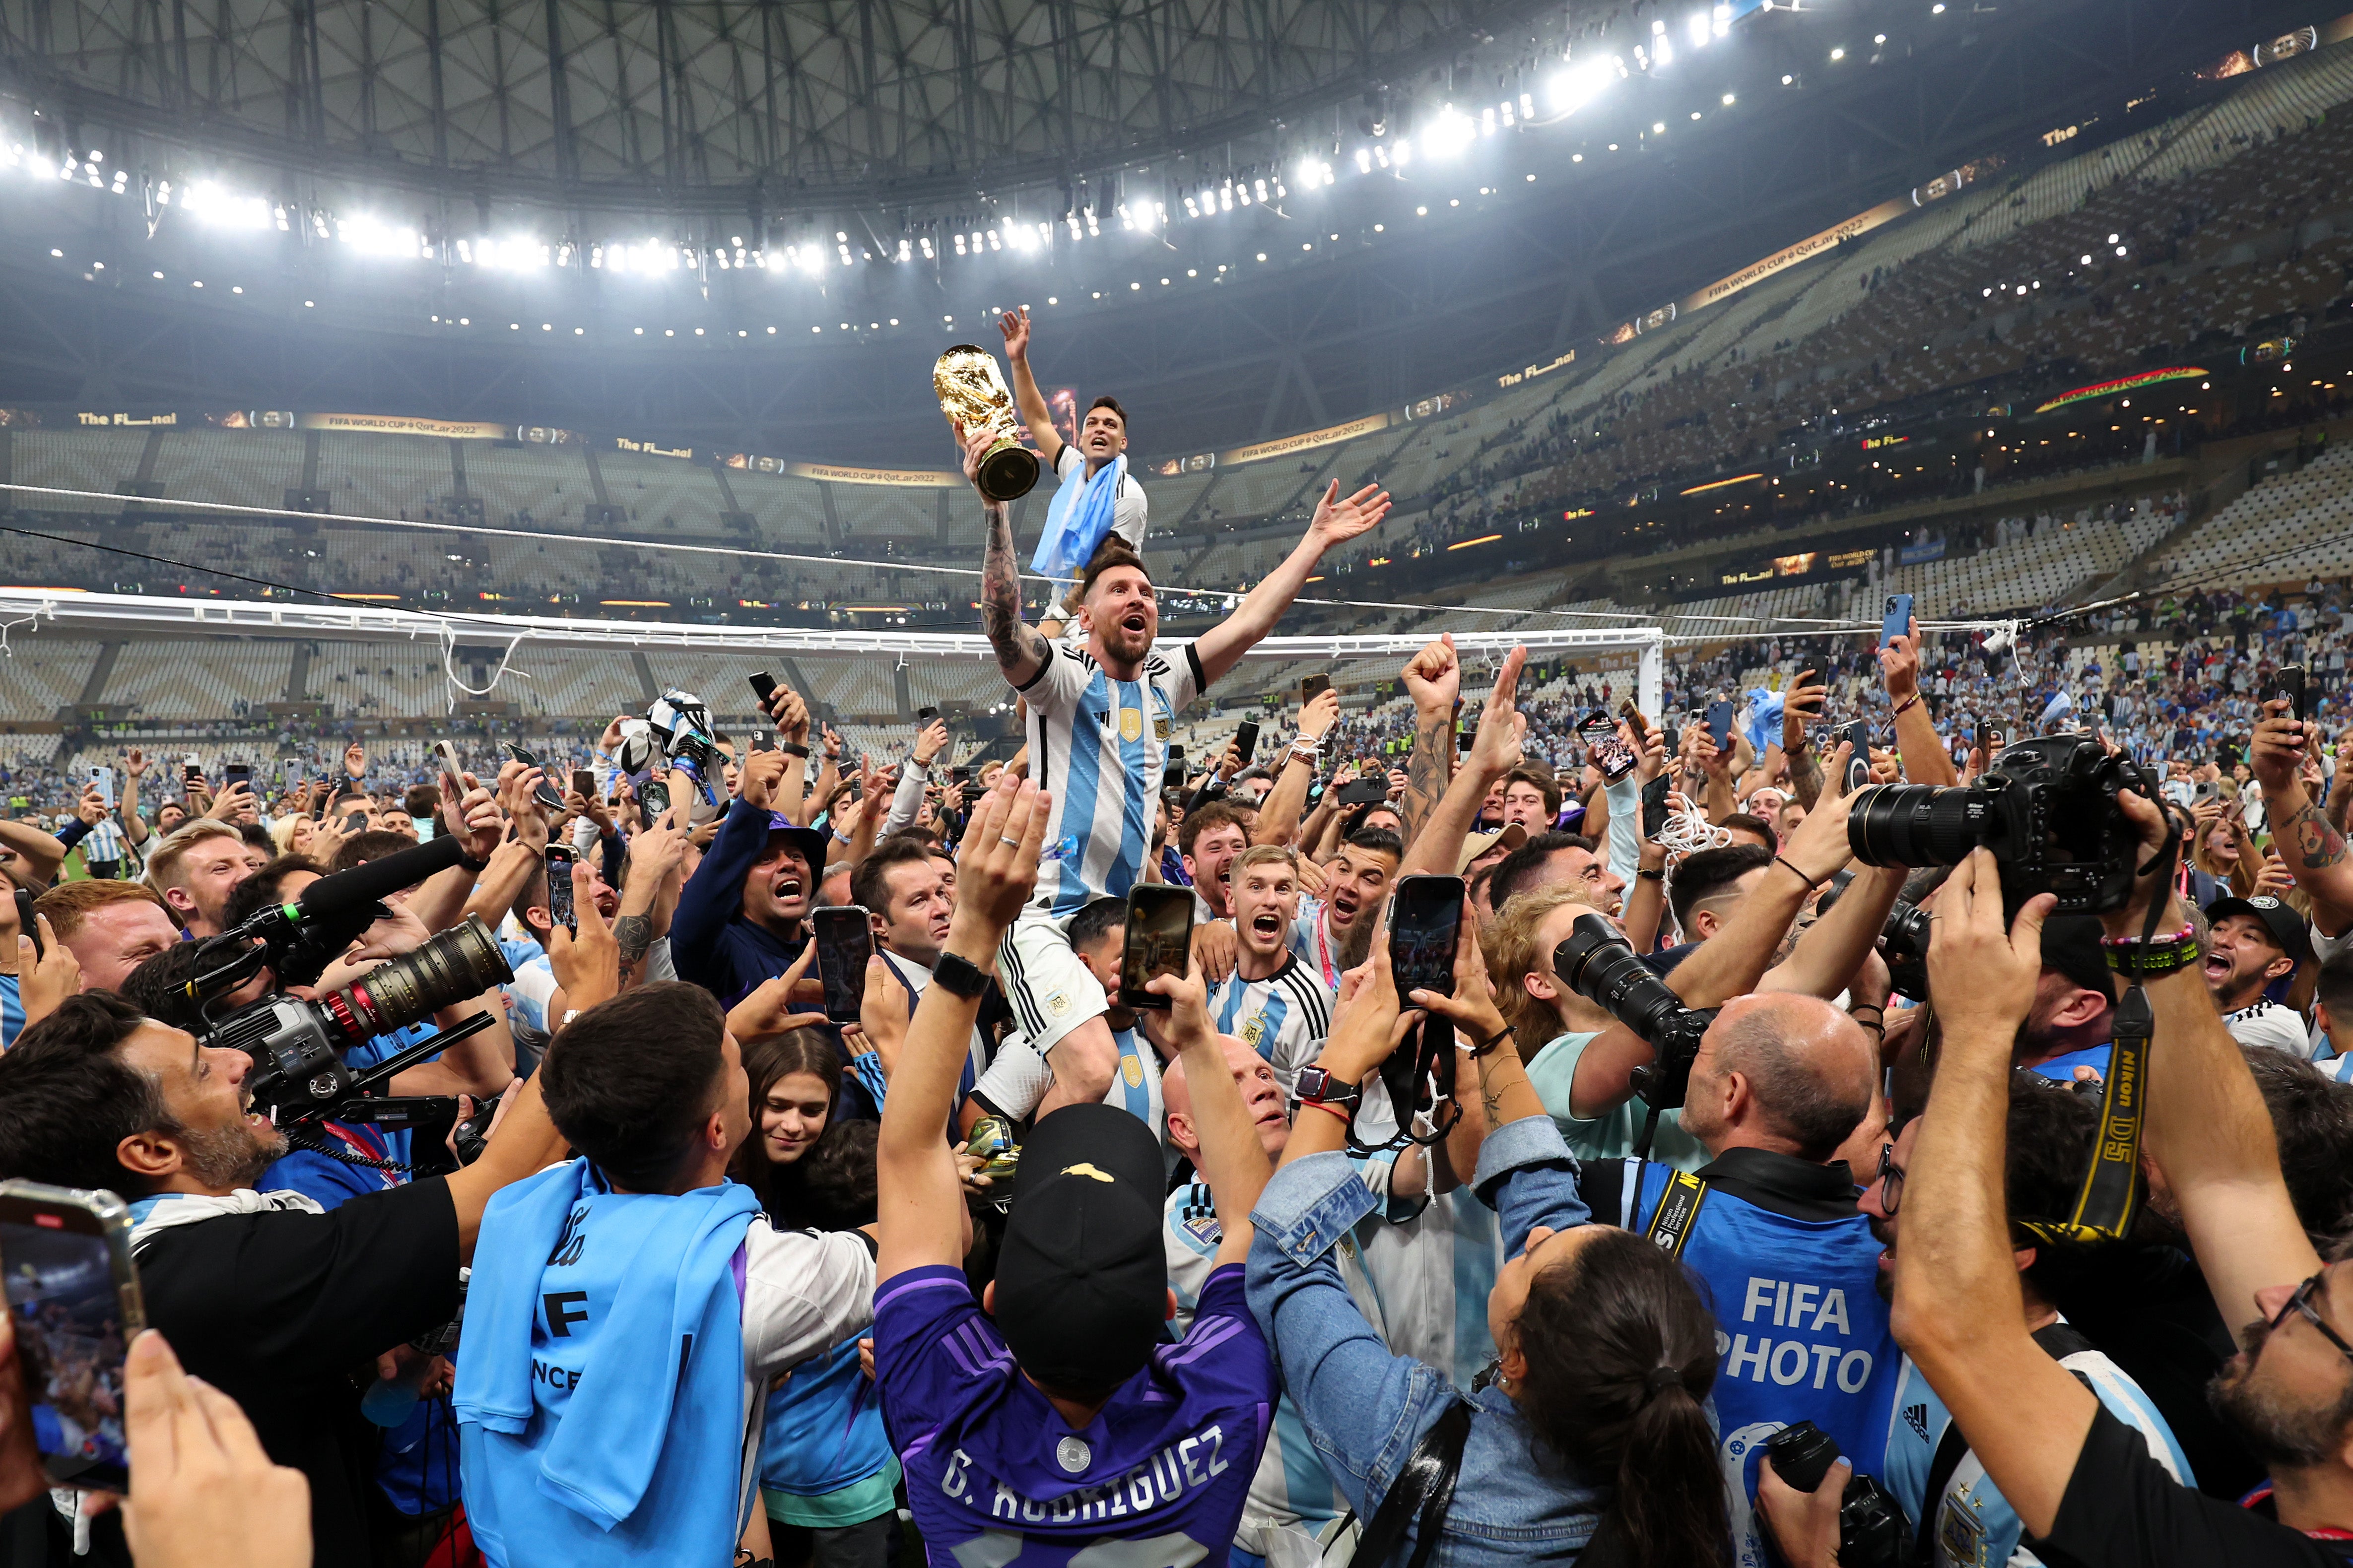 Messi is lifted into shoulders to celebrate the win